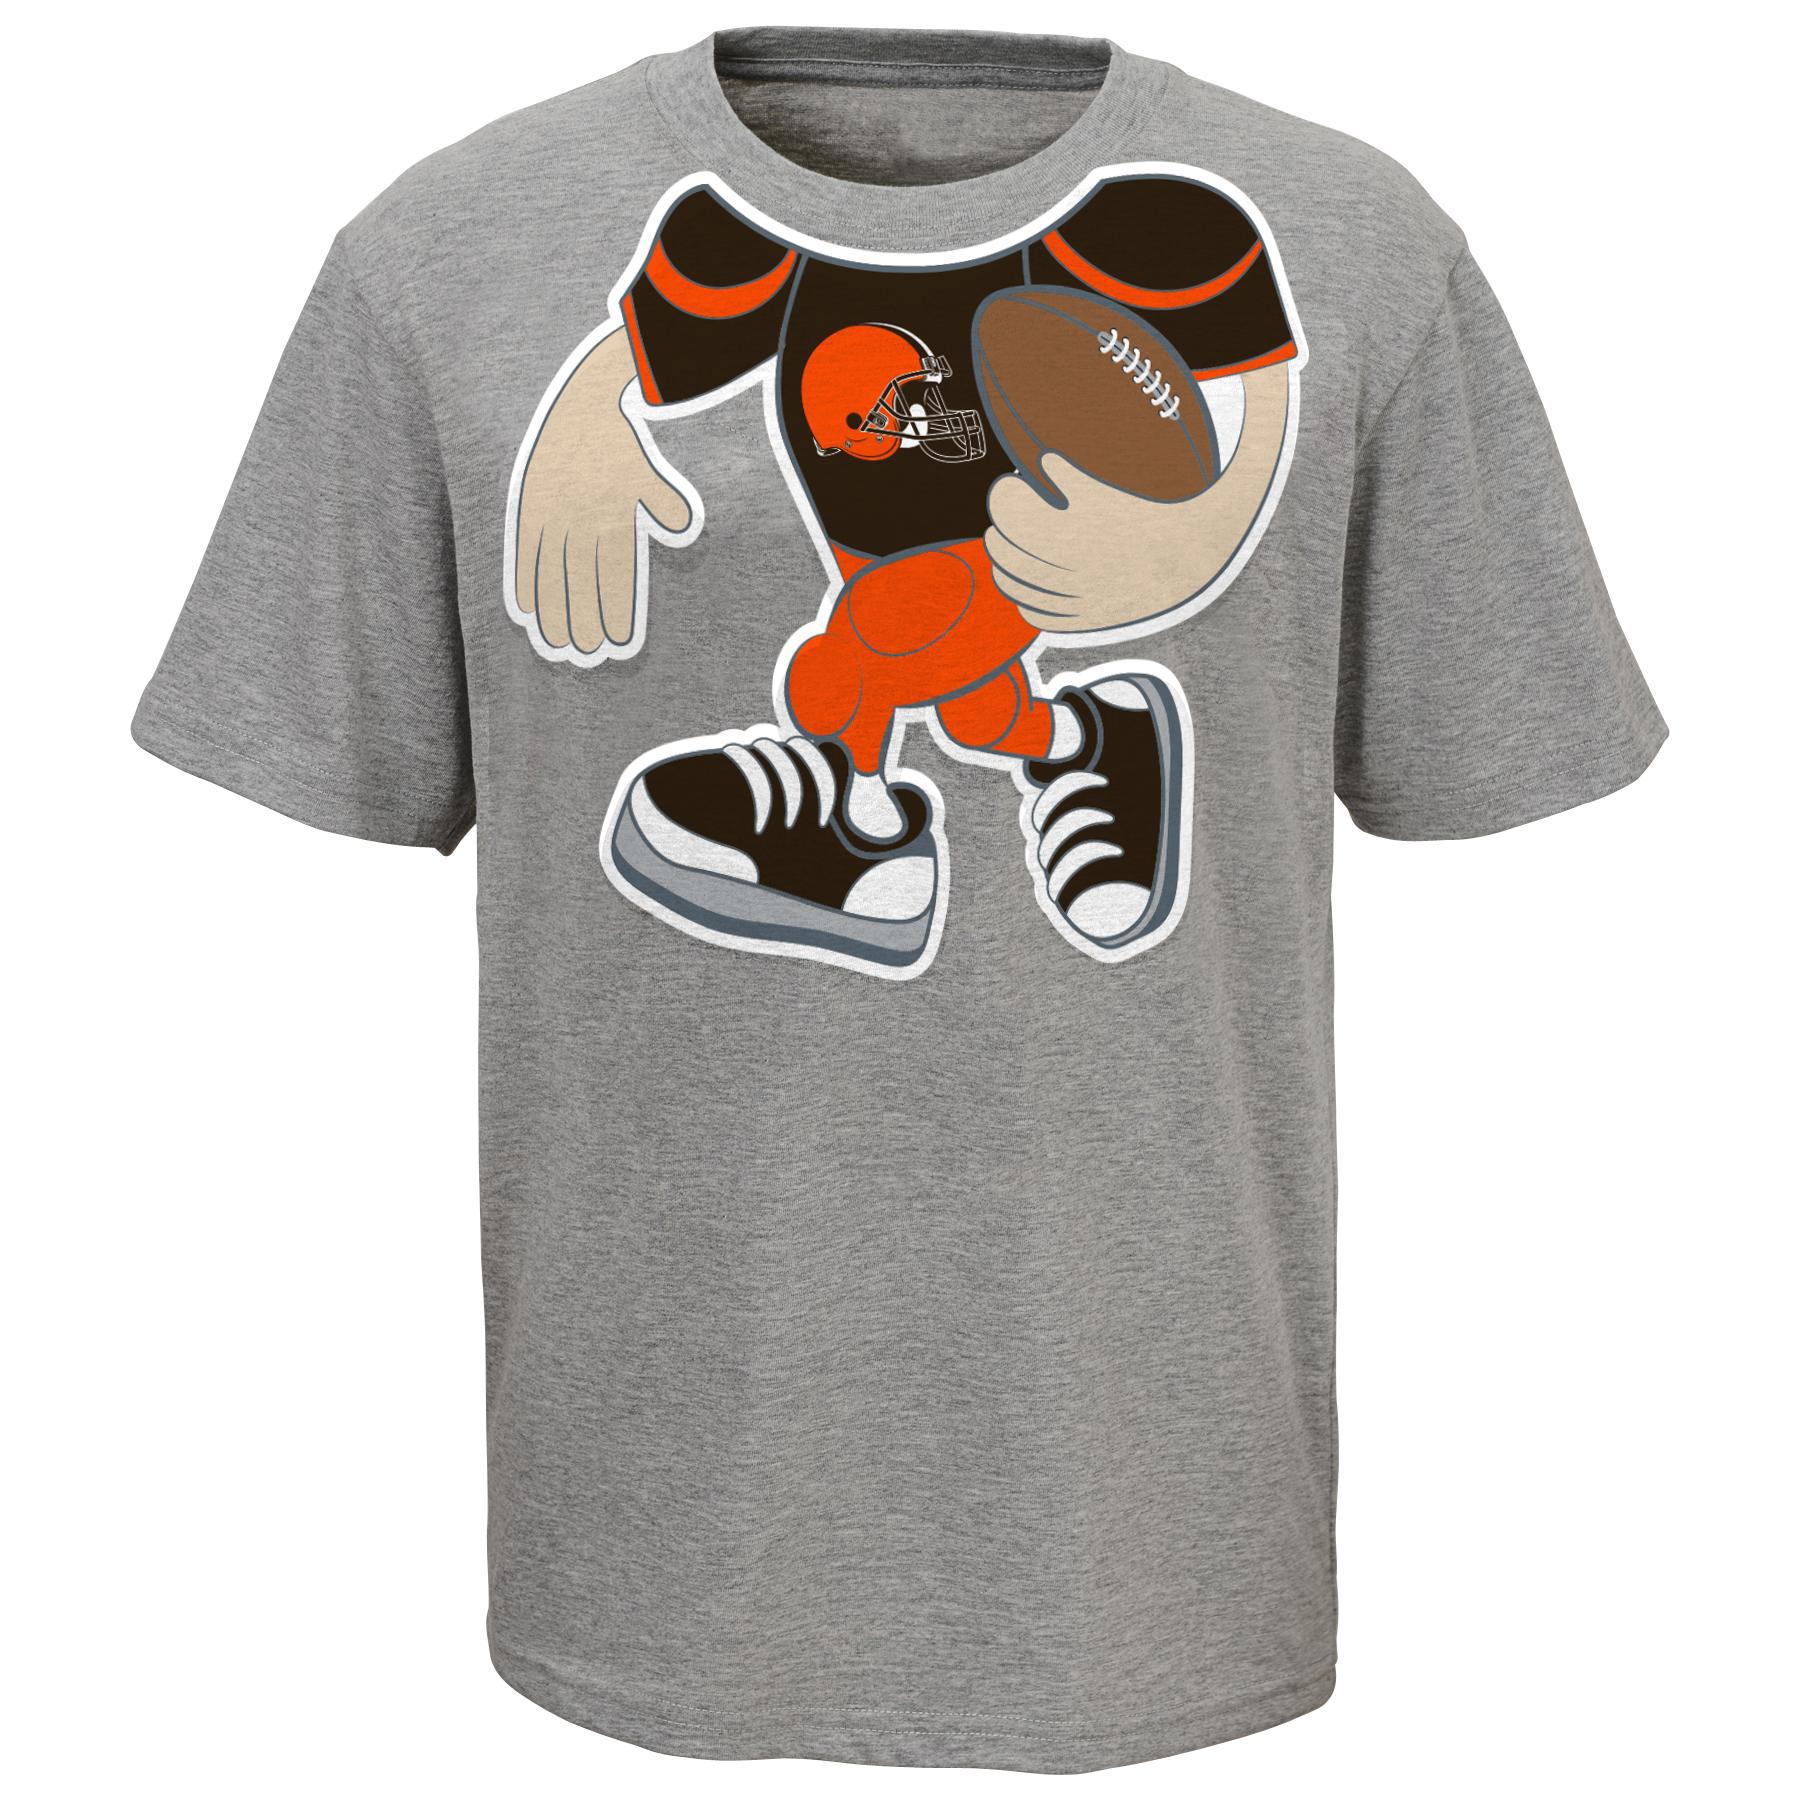 NFL Toddler Boys' Graphic T-Shirt - Cleveland Browns